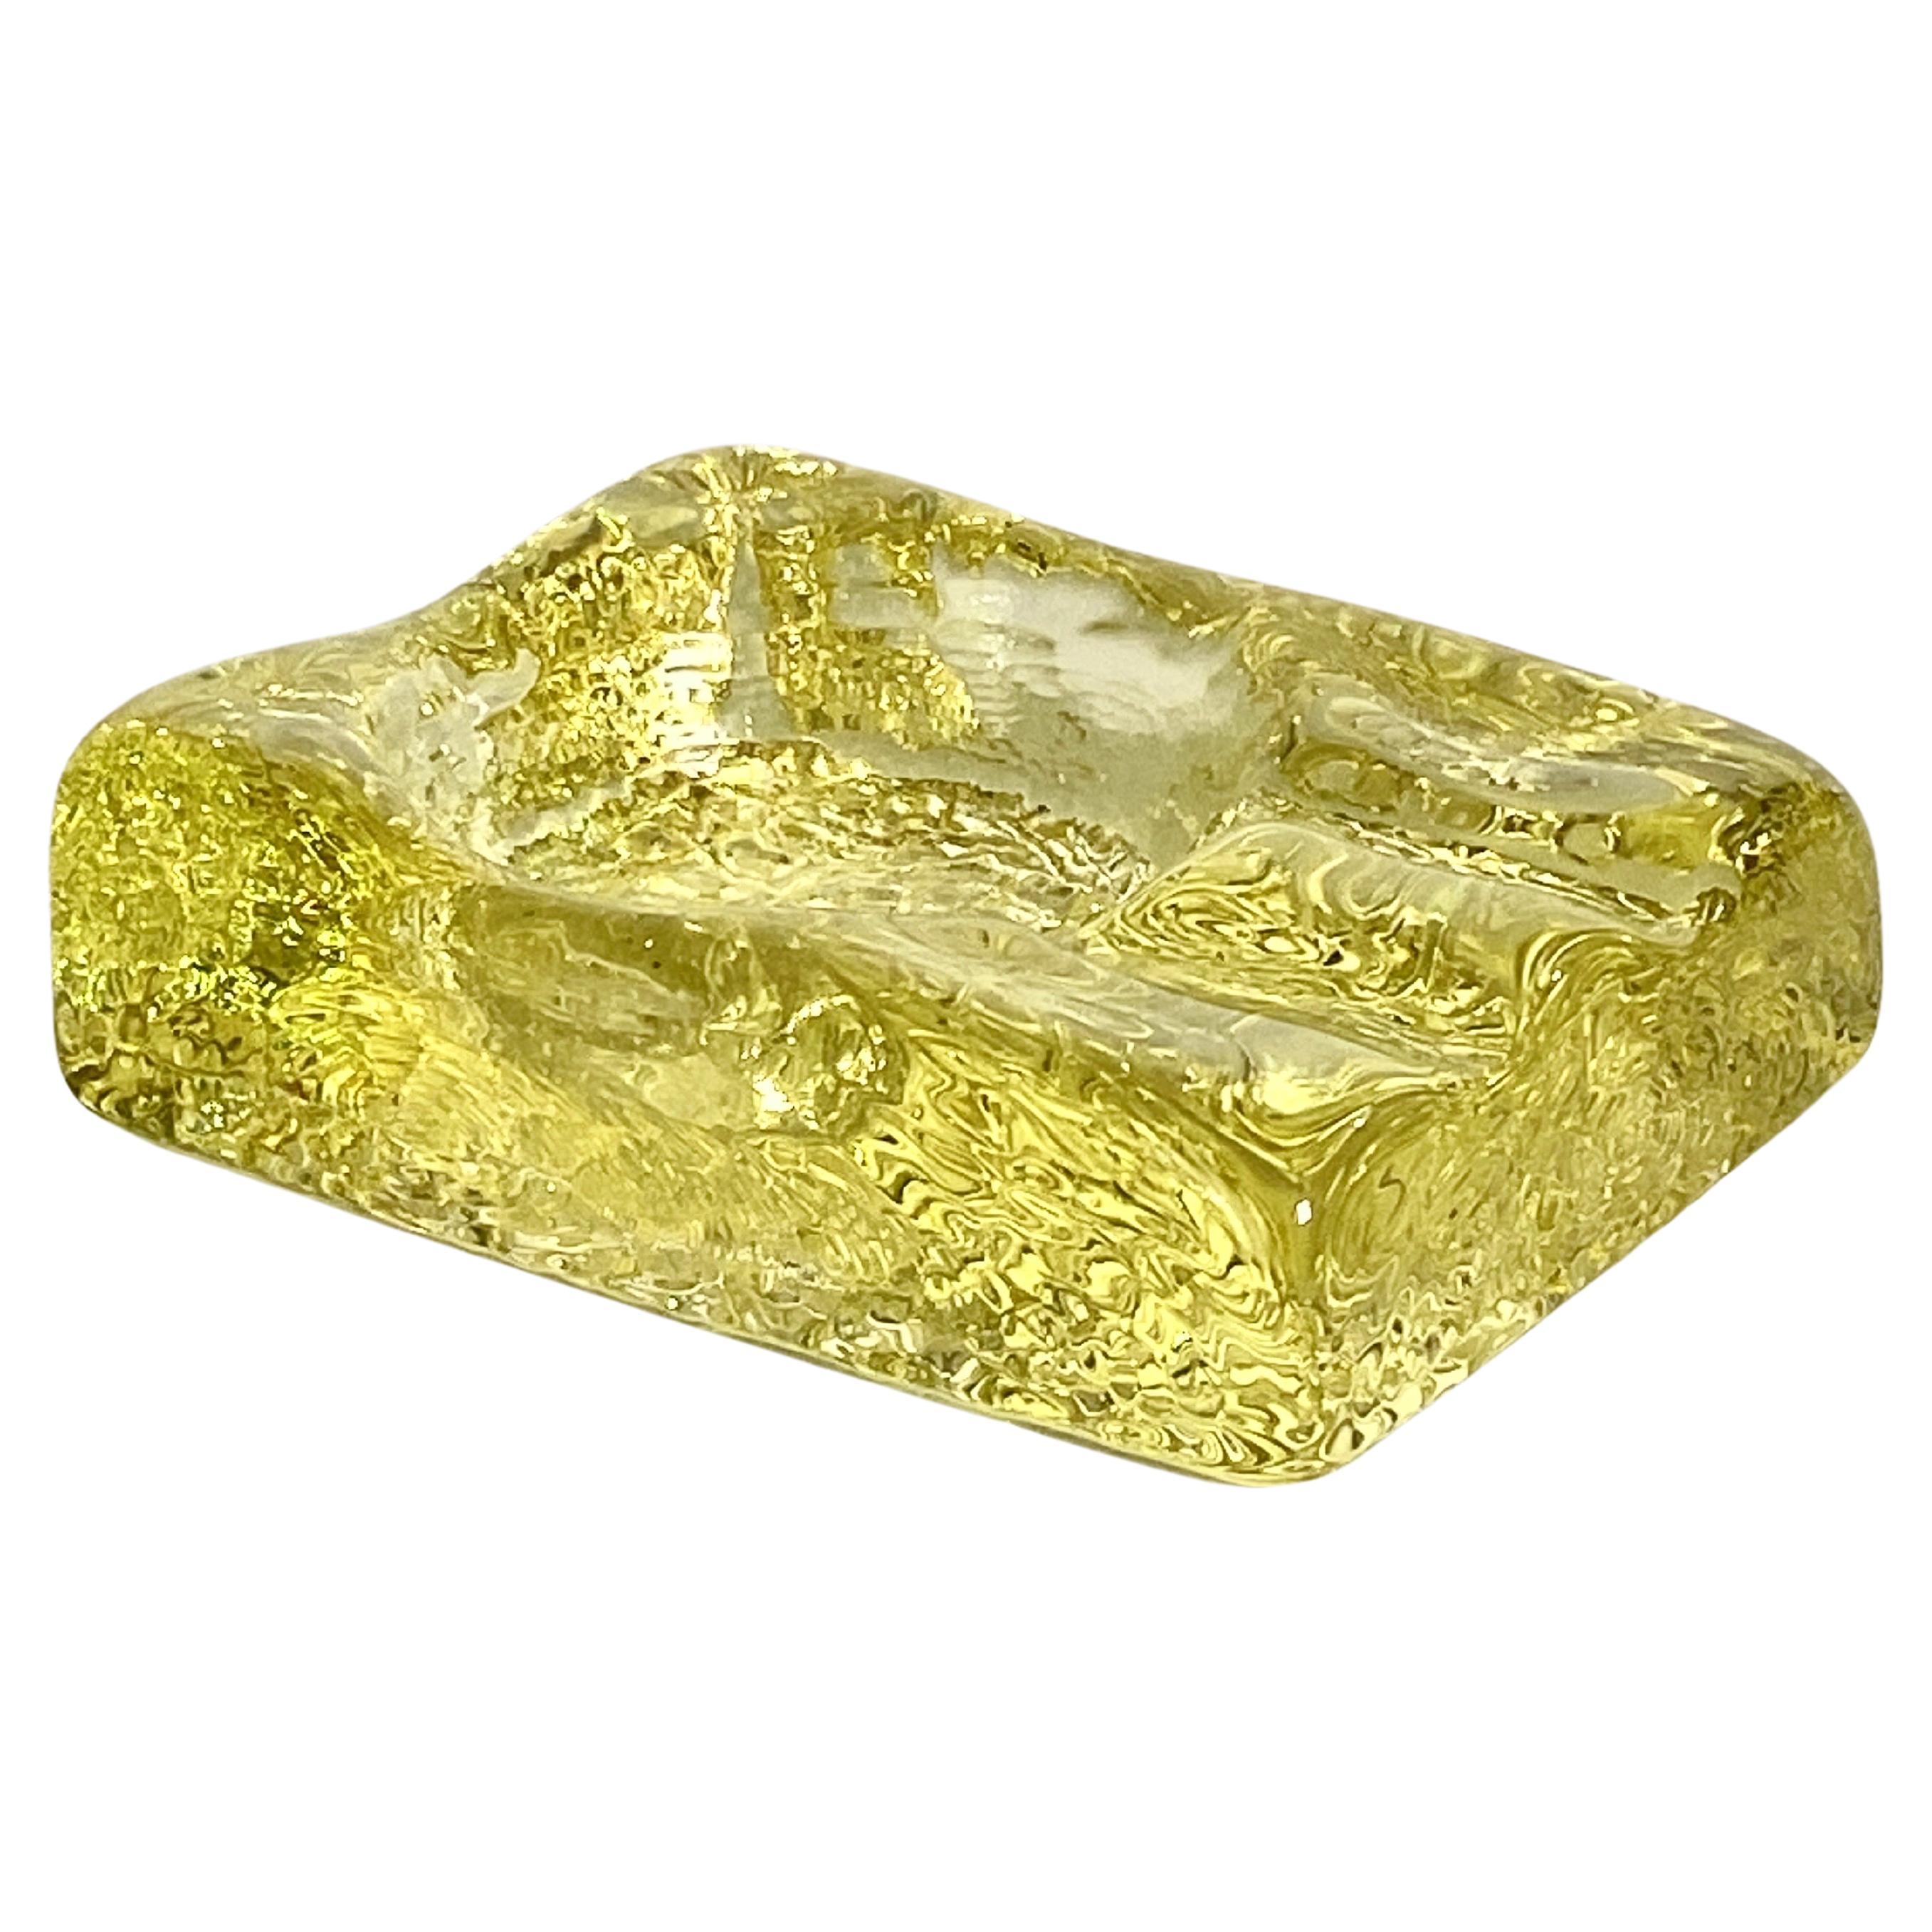 Yellow Bubled Glass Ashtray, Made in France in the 1970's